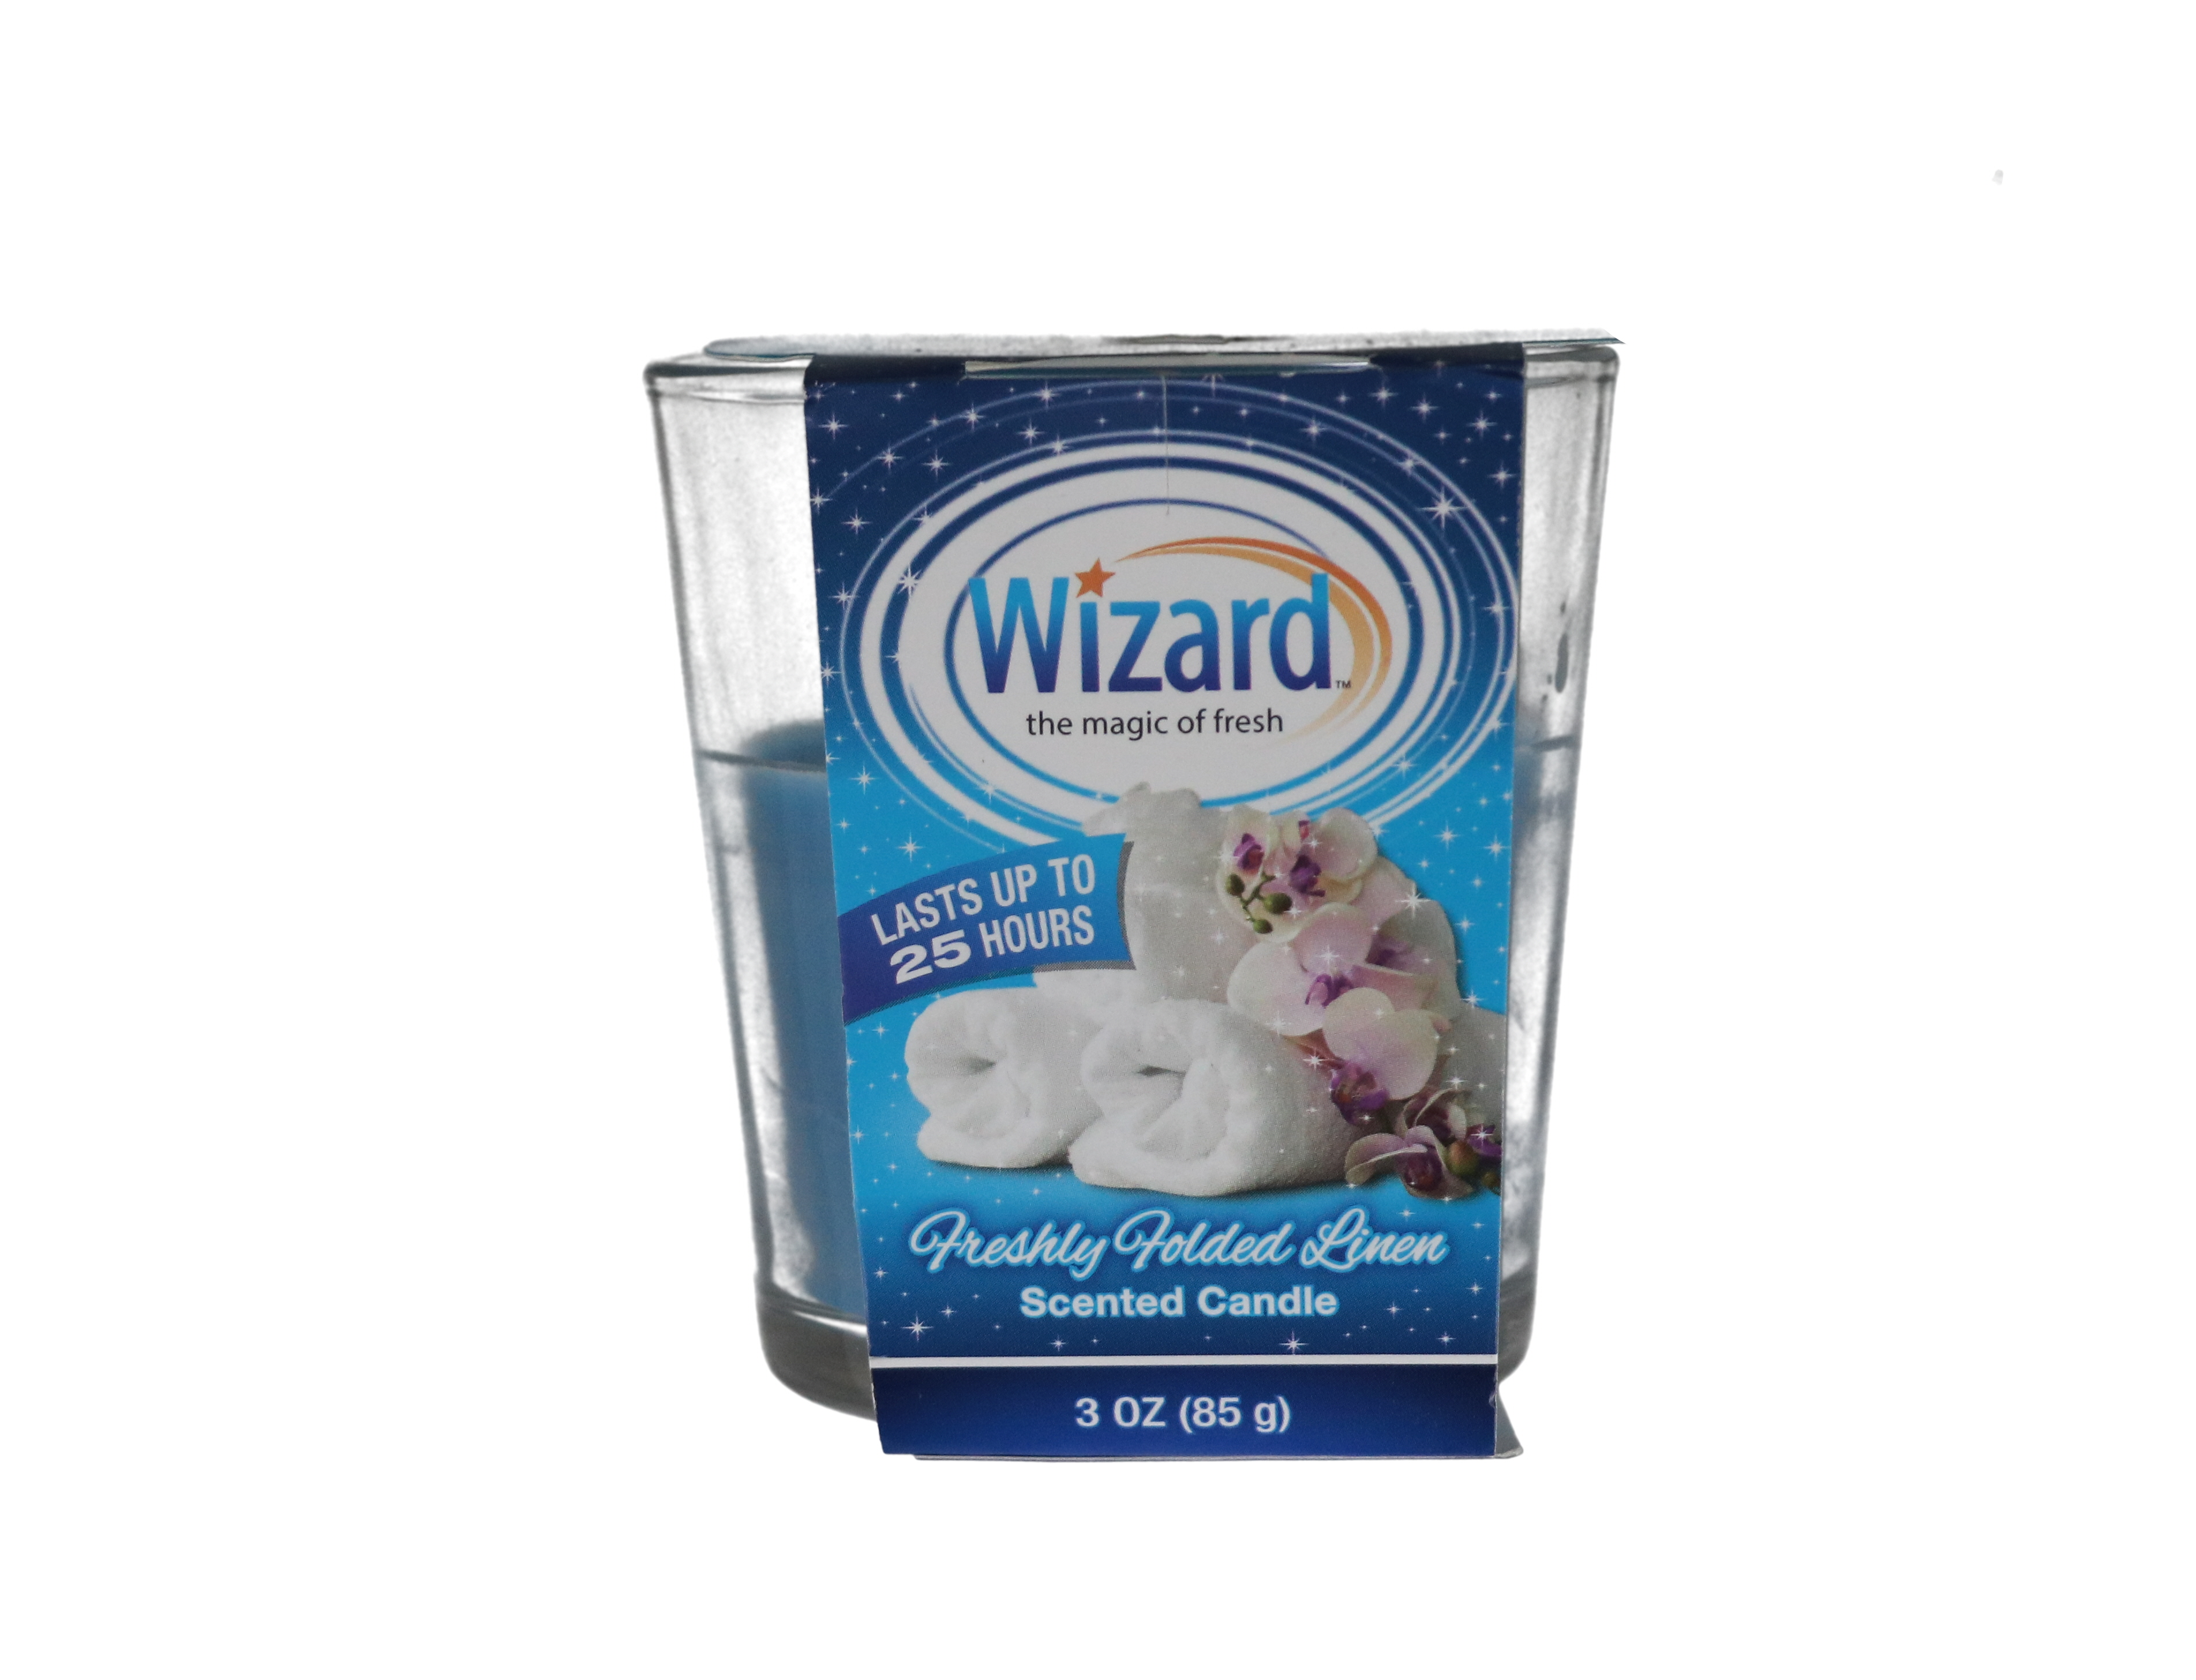 WIZARD FRESHELY FOLDED LINEN SCENTED CANDLE